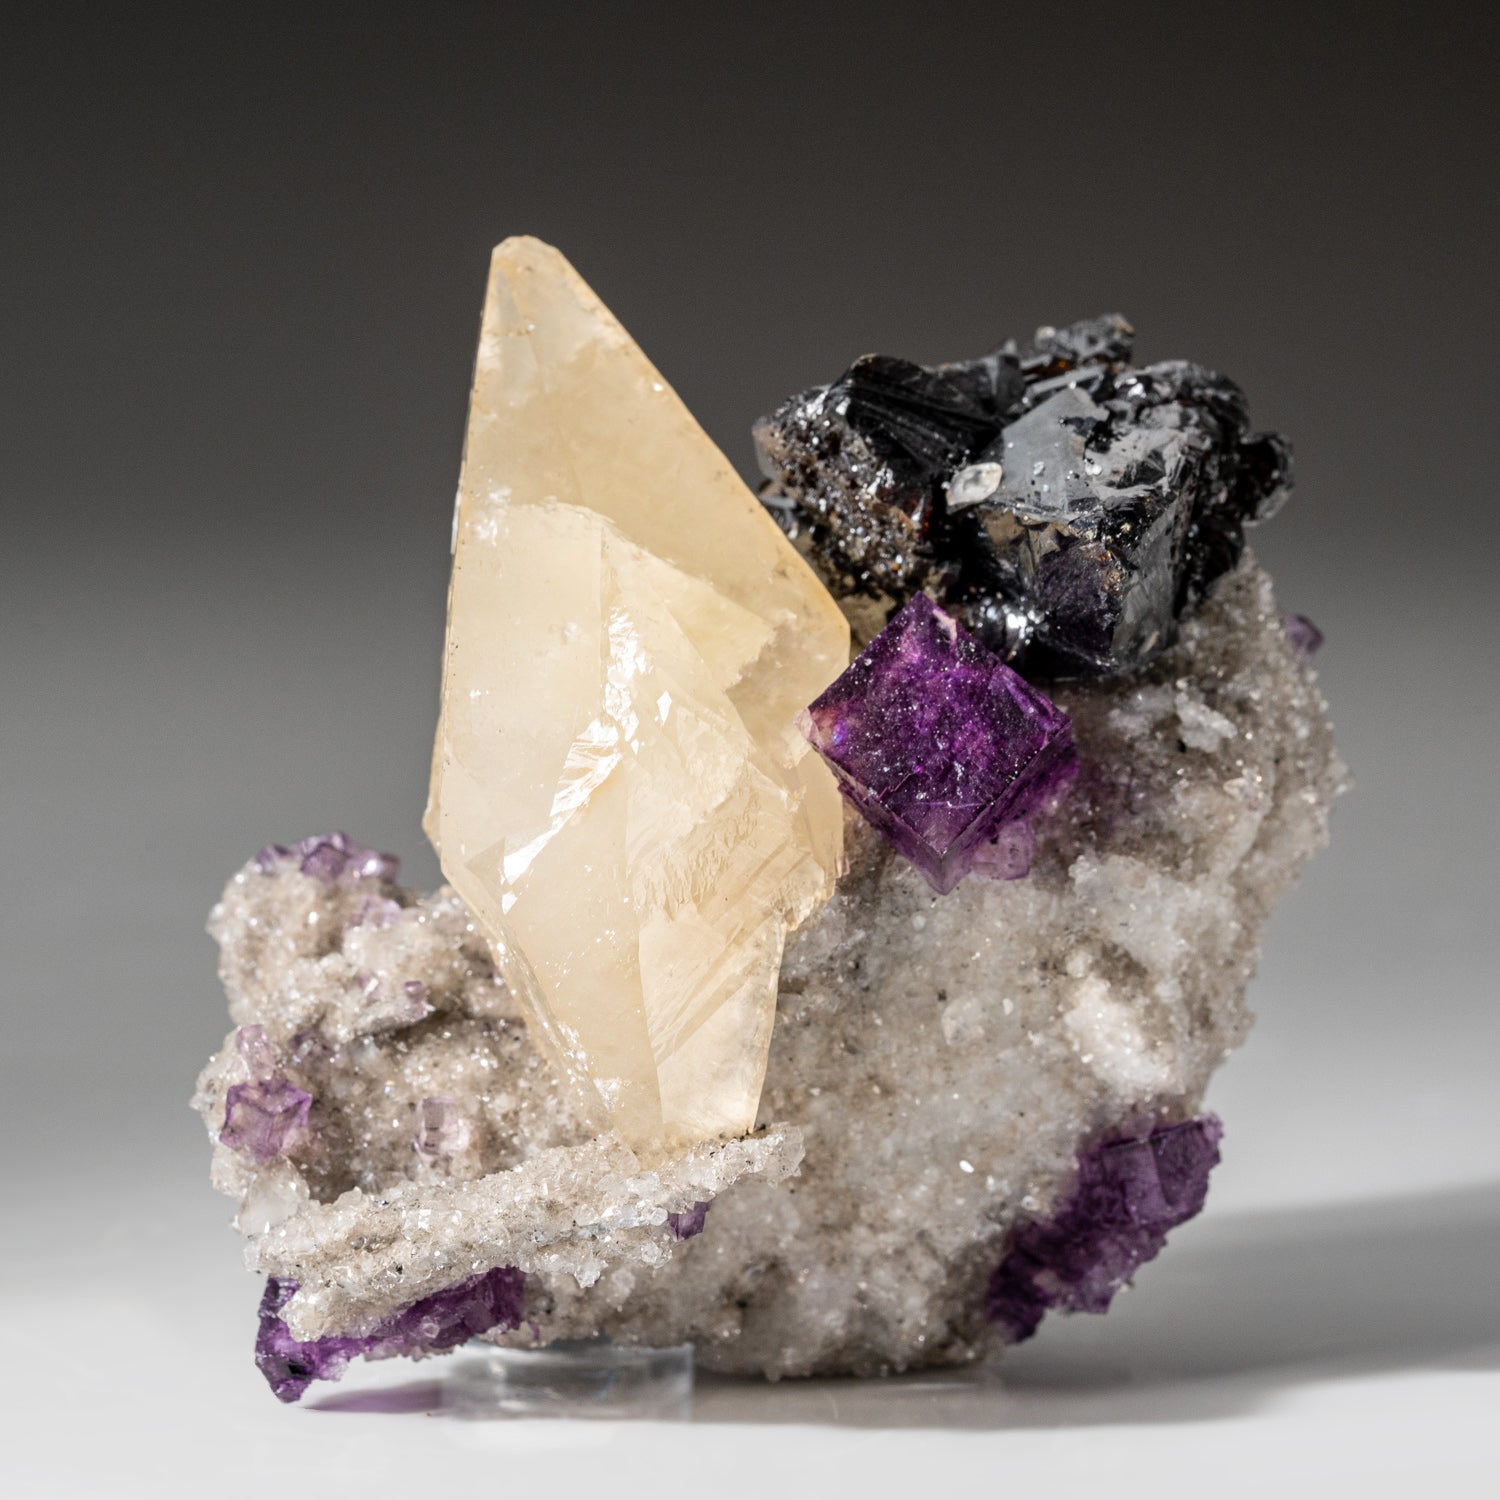 Golden Calcite with Sphalerite and Fluorite Crystal from Elmwood Mine, Tennessee